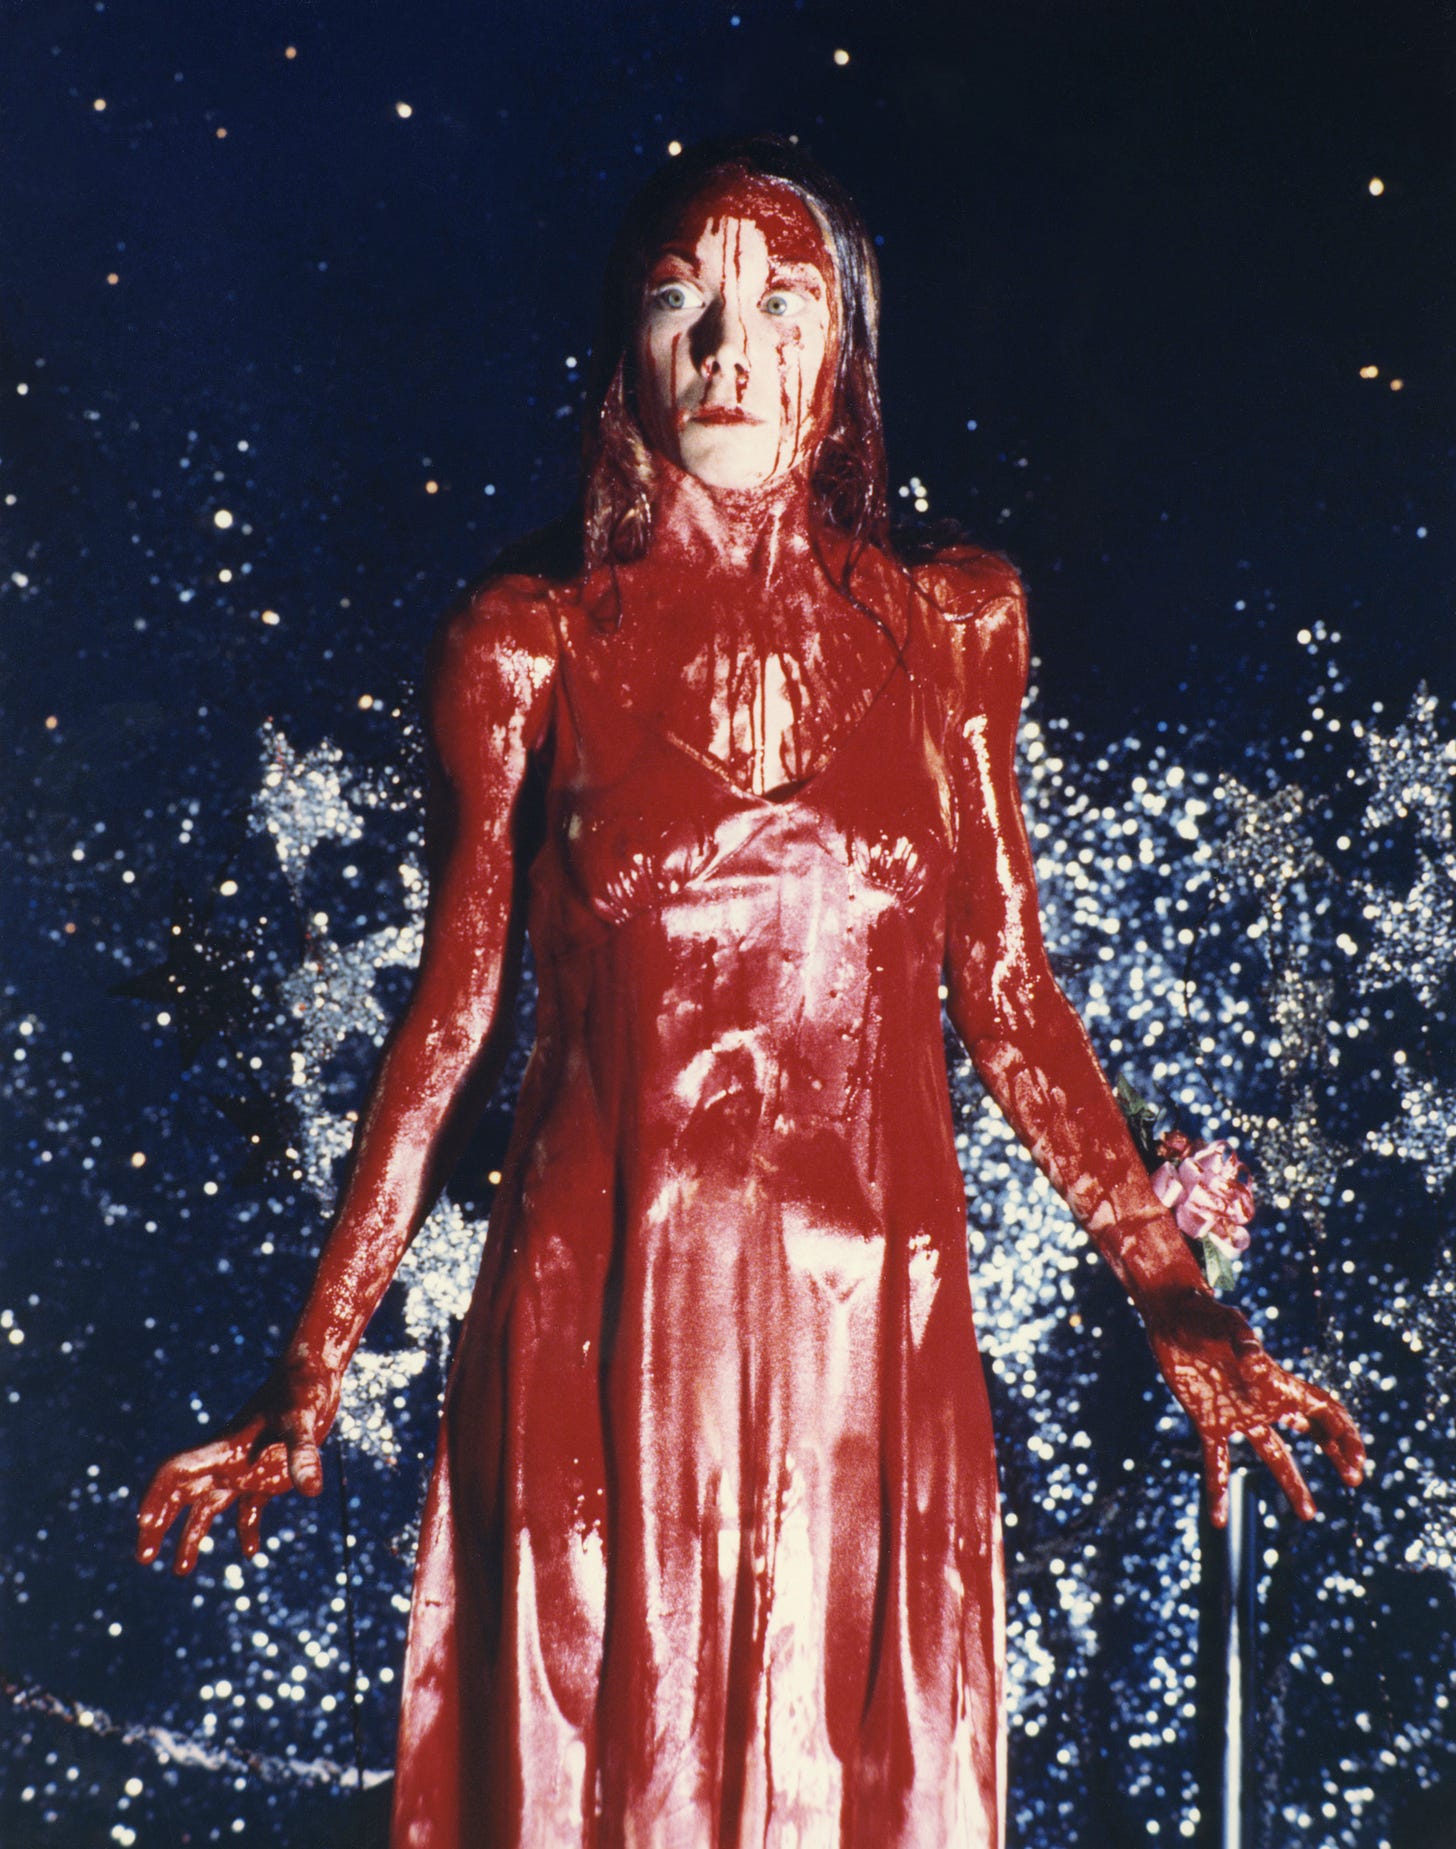 Carrie is soaked in blood on the prom stage, eyes wide open with rage and terror (Carrie, 1976) 